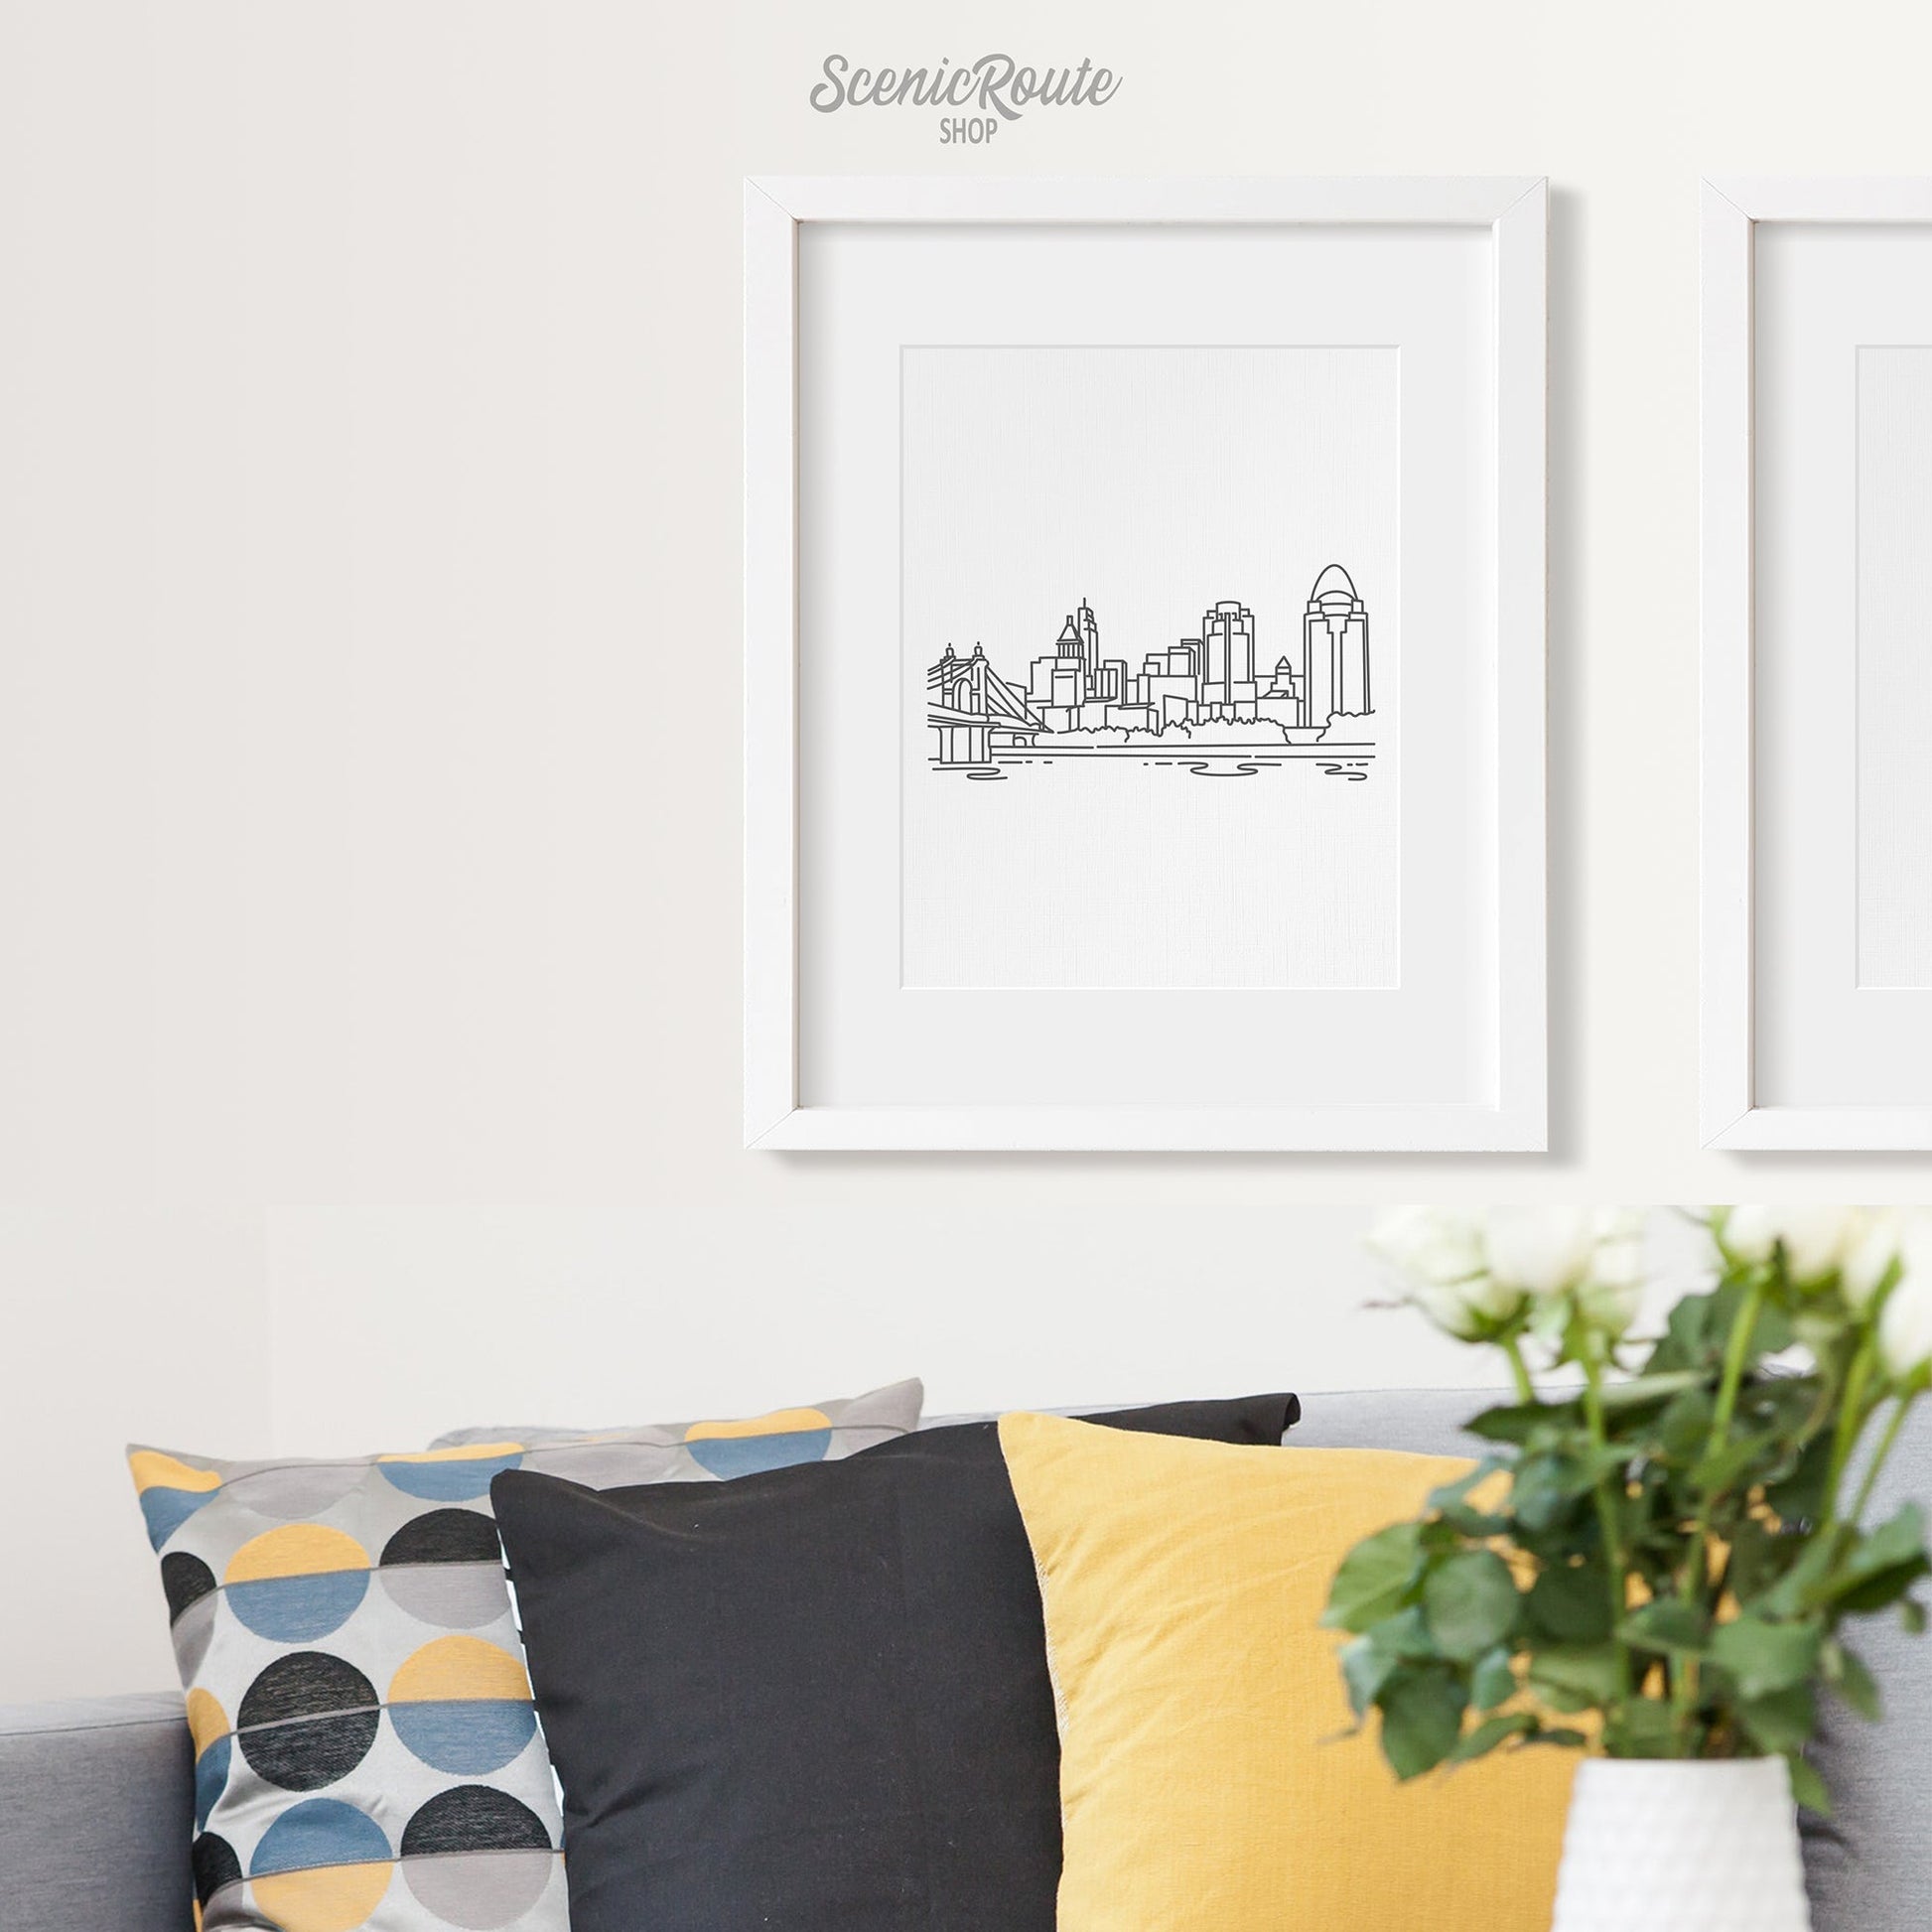 A framed line art drawing of the Cincinnati Skyline on a white wall above a couch with pillows